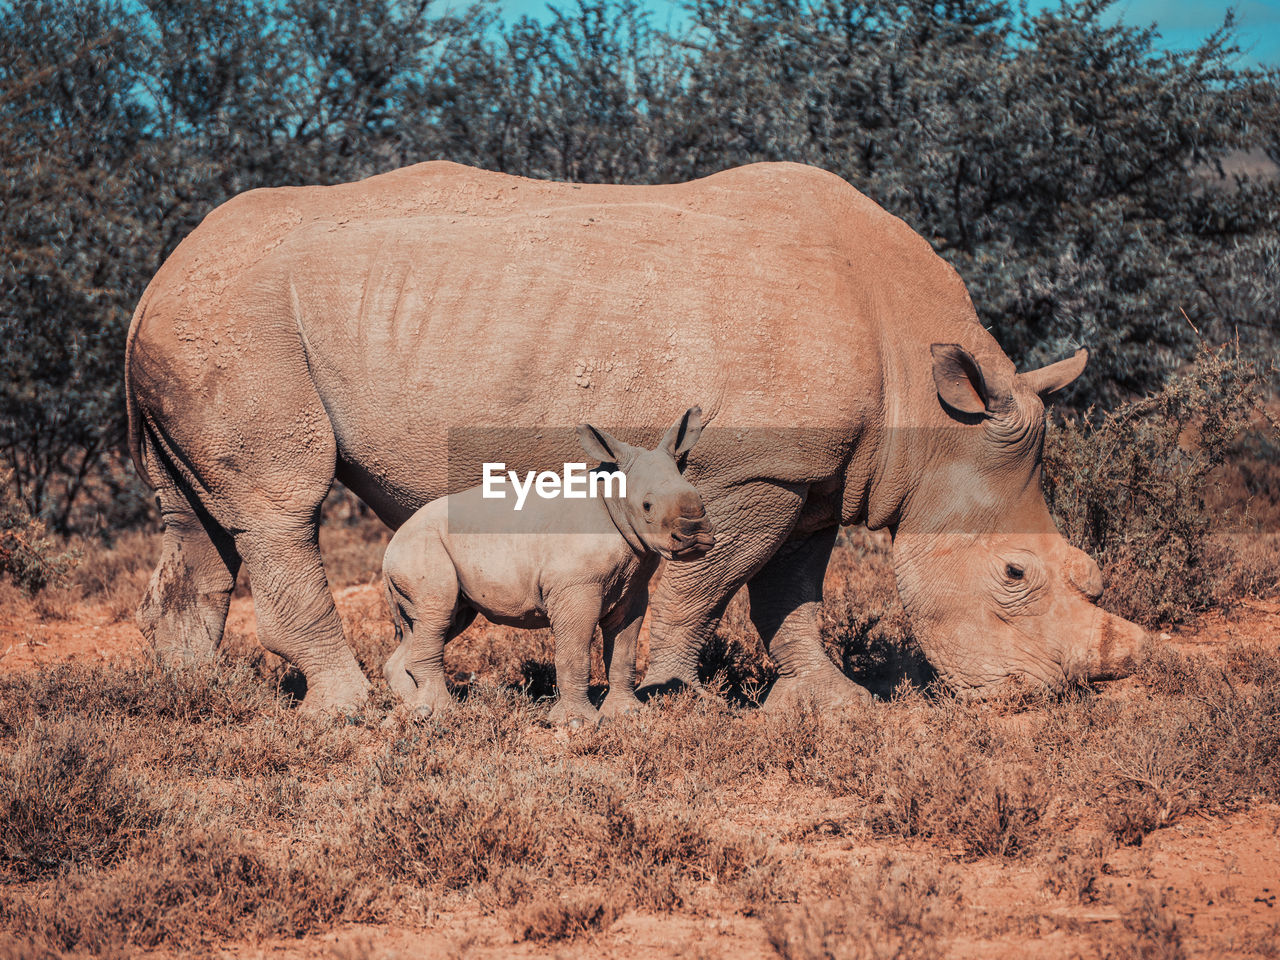 Rhinoceros with young animal on field